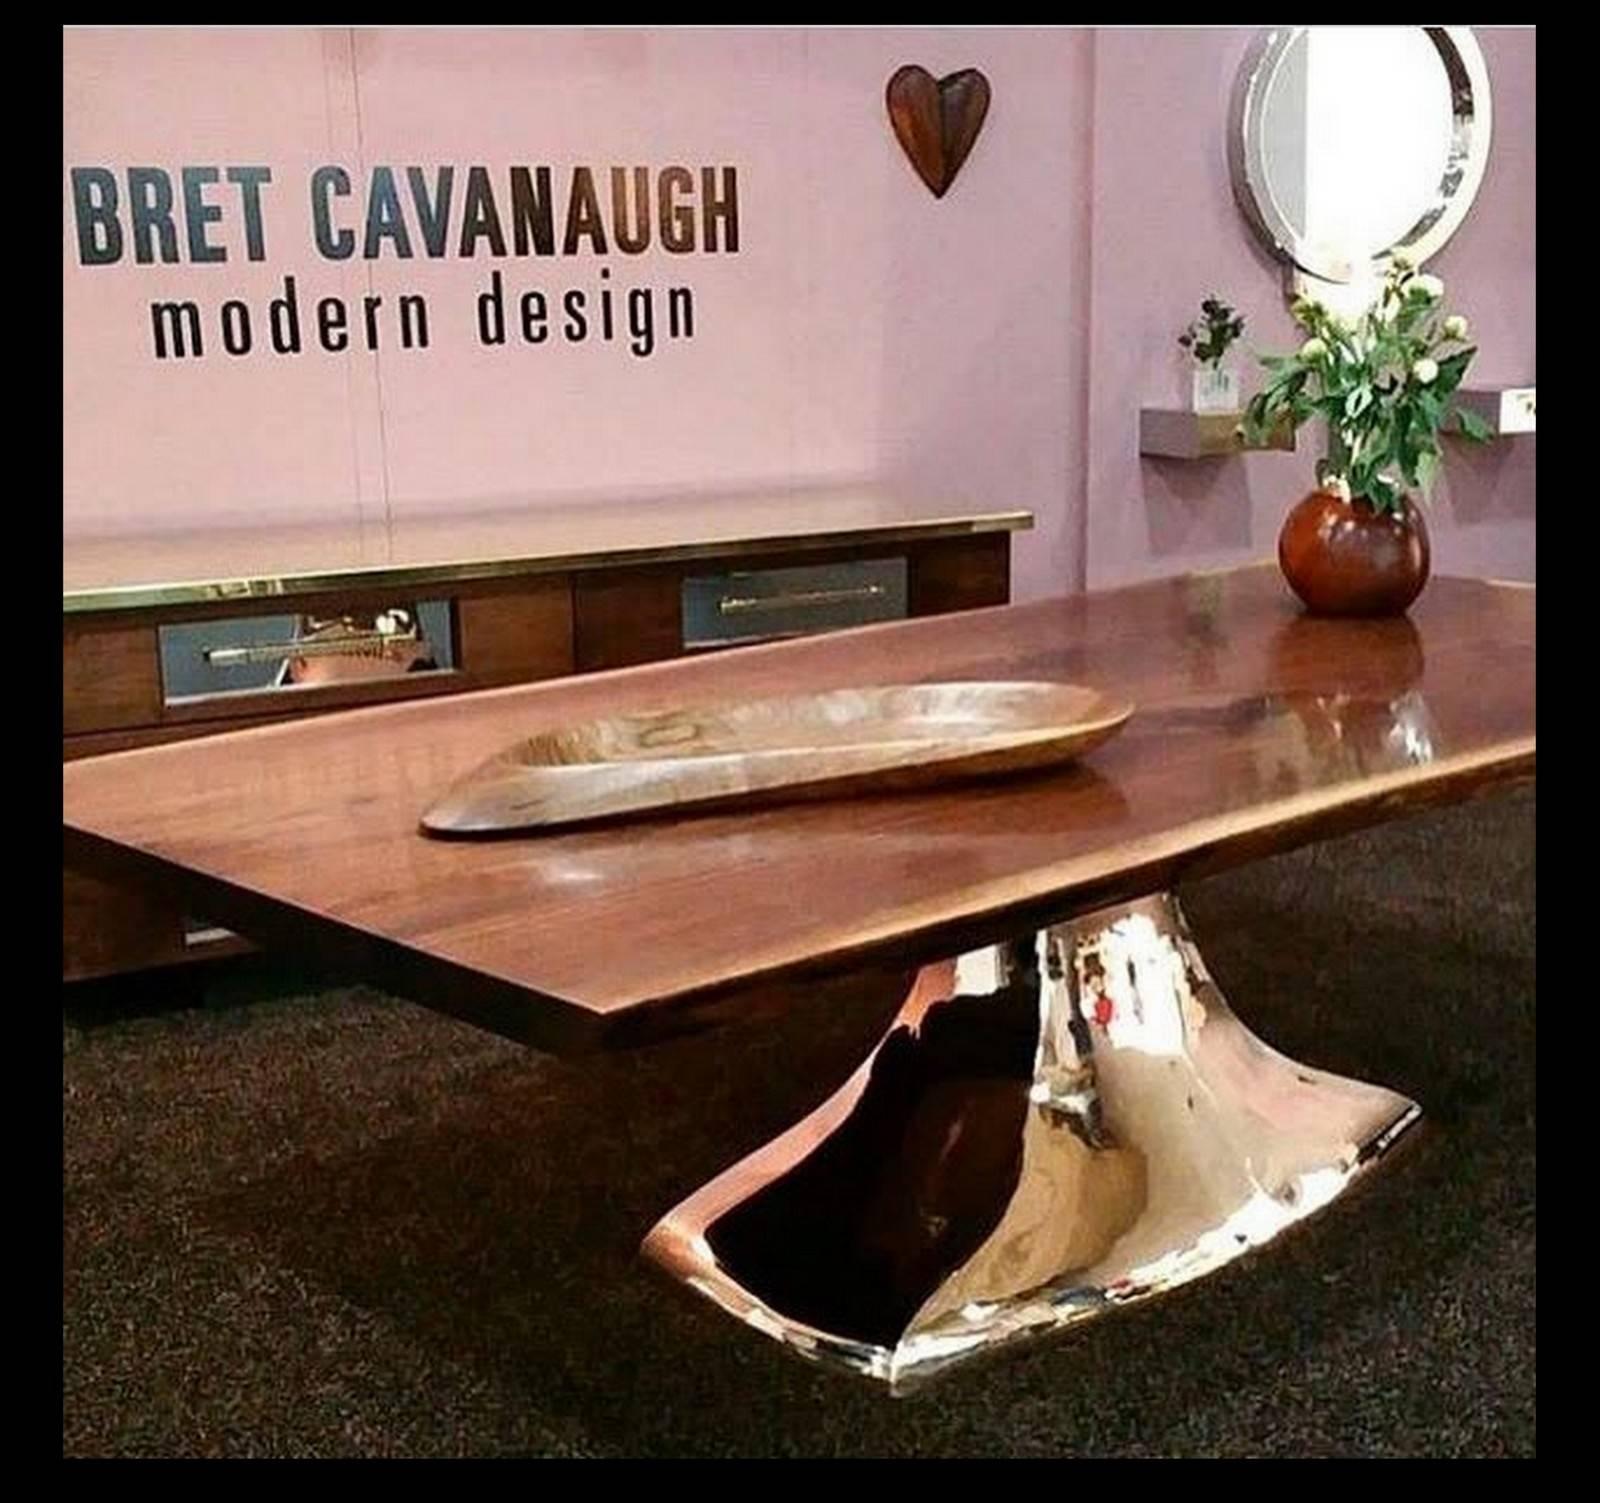 Called the "Bronze Lug" Hand-sculpted base is cast in bronze, then hand-polished to a mirror finish. Live edge black walnut slab top

Bret Cavanaugh is a modern craftsman and designer with a penchant for working with natural materials. A